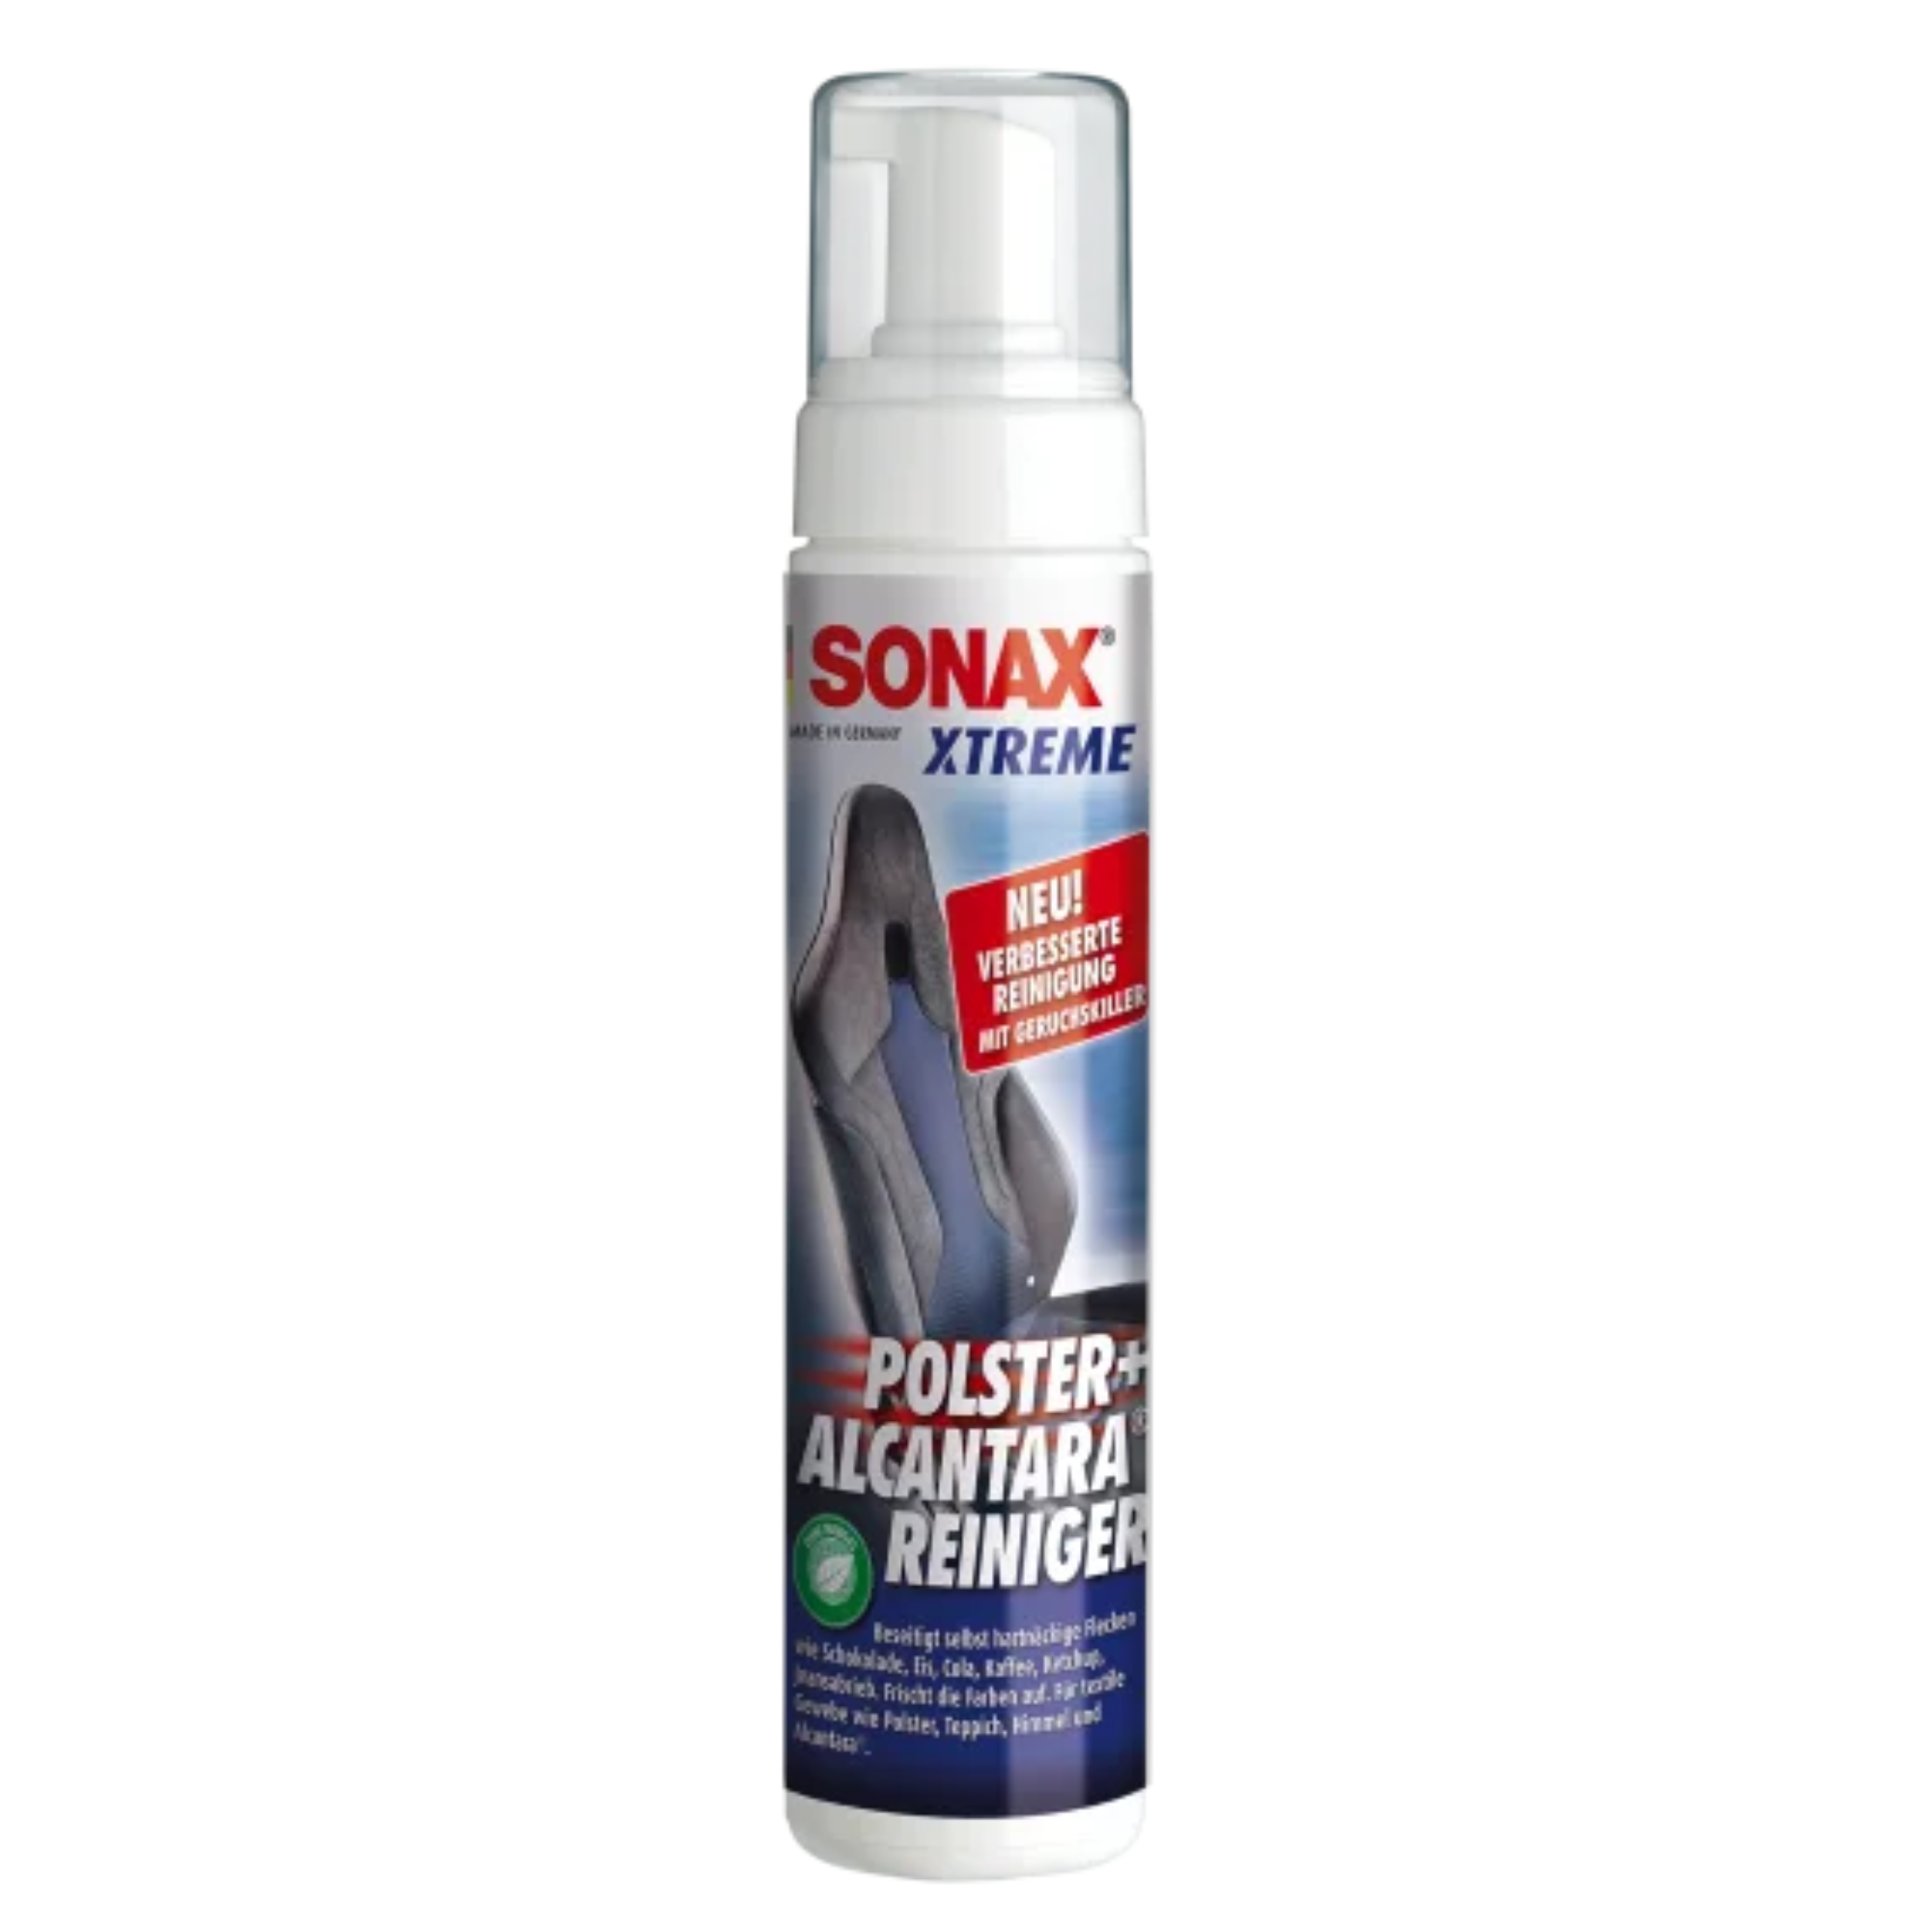 Buy Leather and alcantara cleaner online